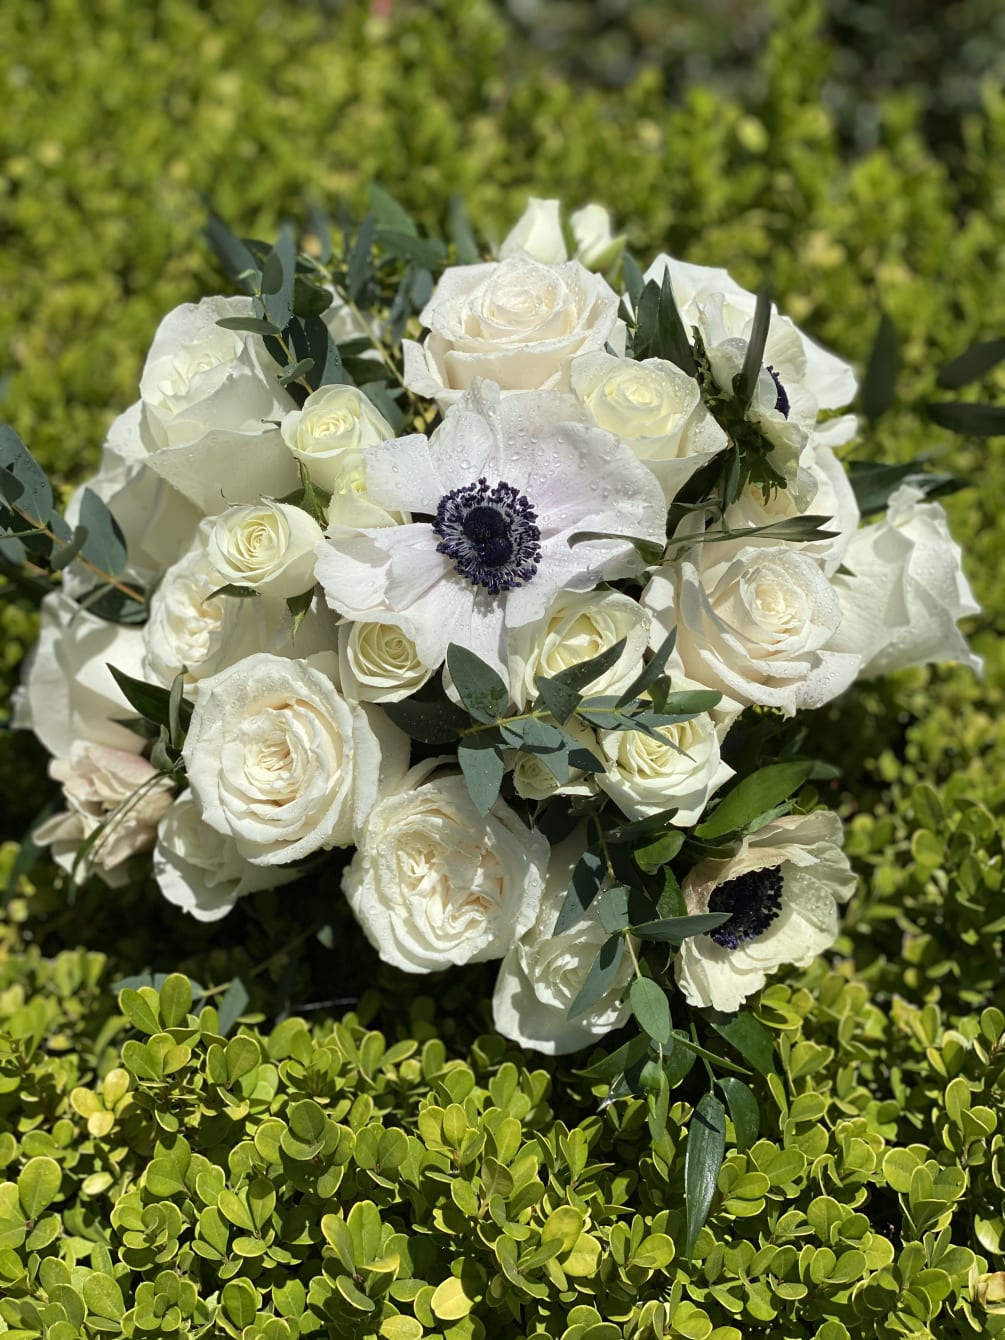 Getting married? Is this your perfect Bouquet? Call us and we can